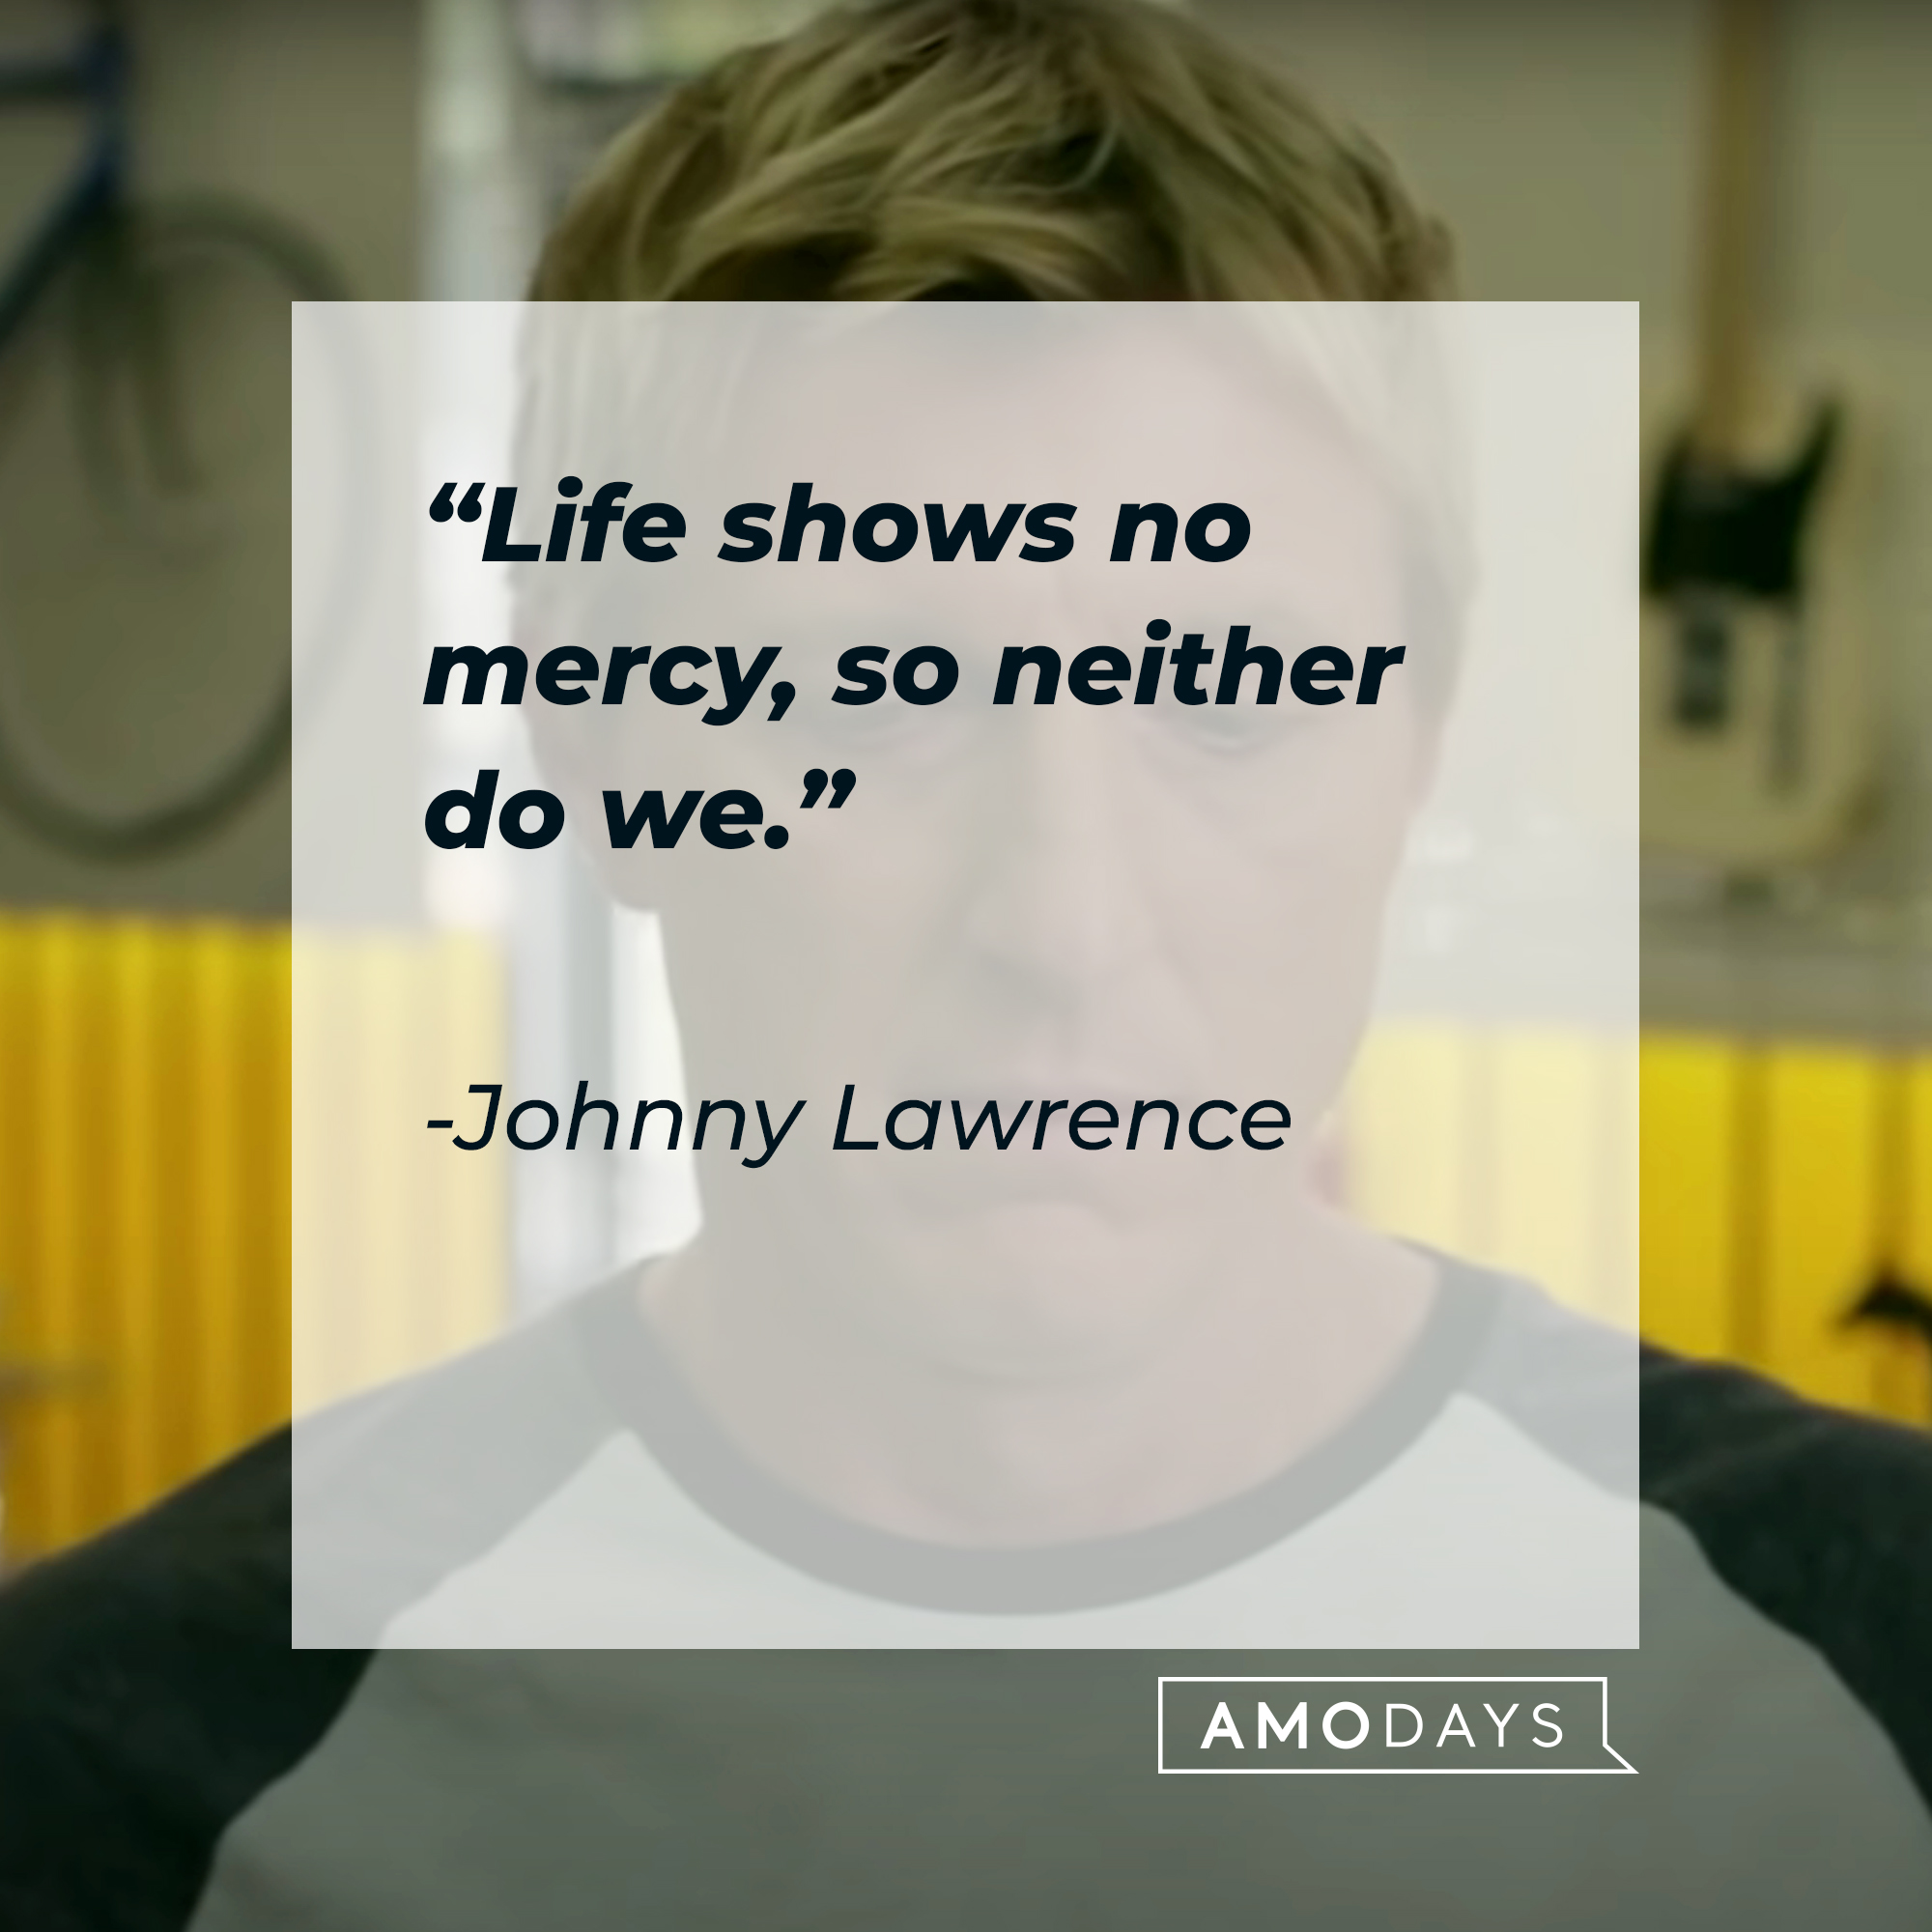 Johnny Lawrence, with his quote: “Life shows no mercy, so neither do we.” | Source: facebook.com/CobraKaiSeries